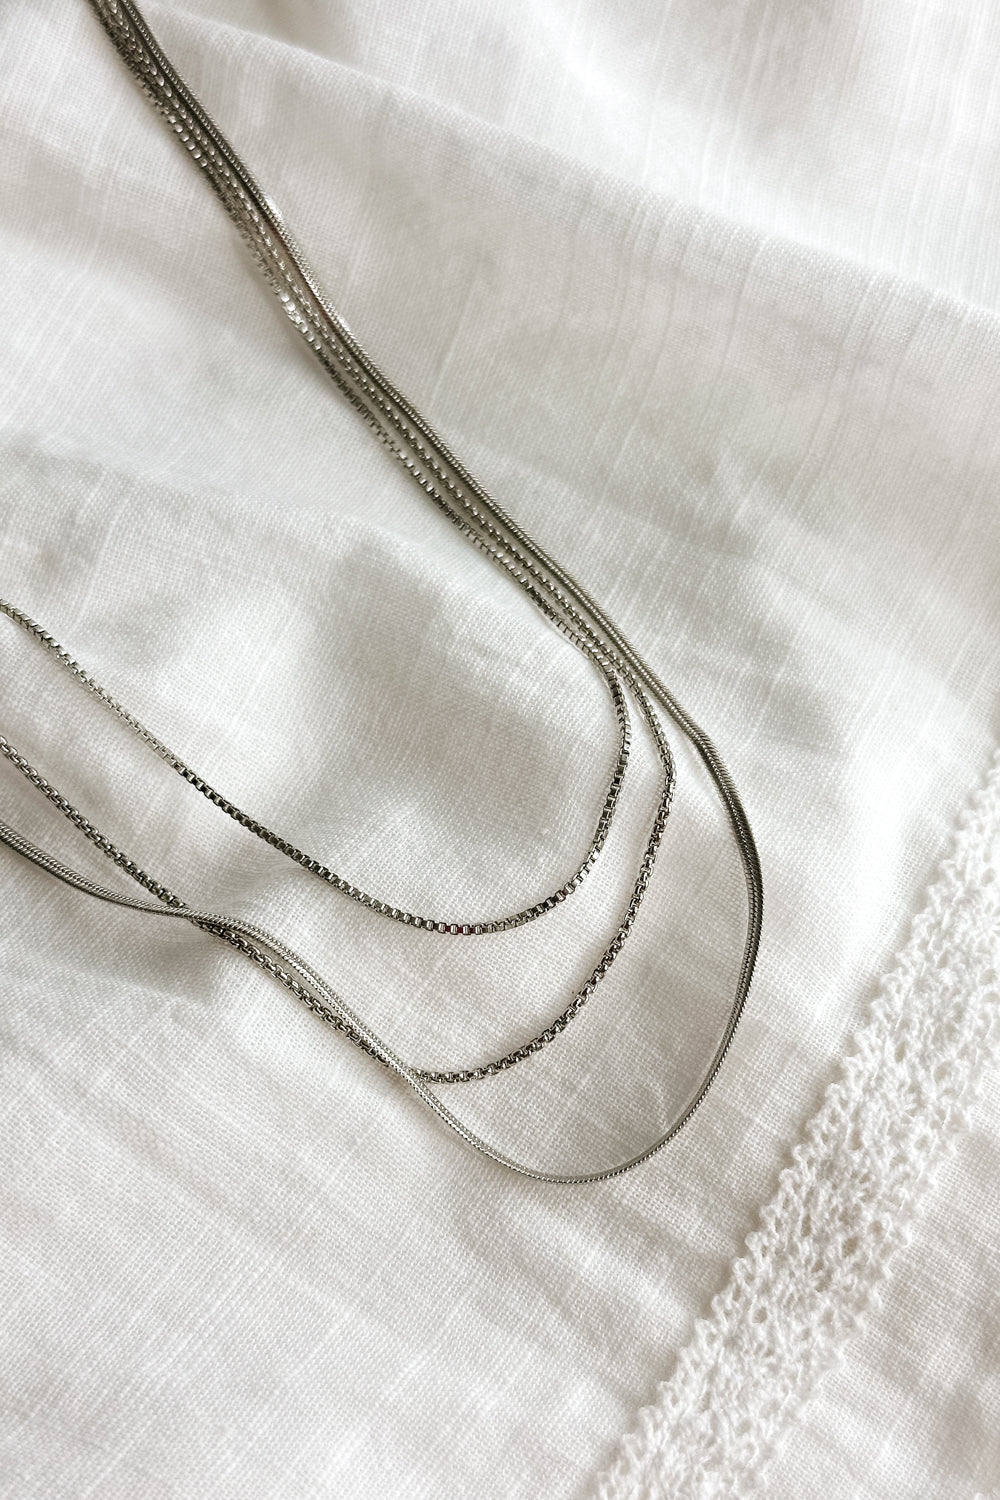 Close up view of the Camila Silver Triple Layered Chain Necklace which features silver triple layer chain necklace